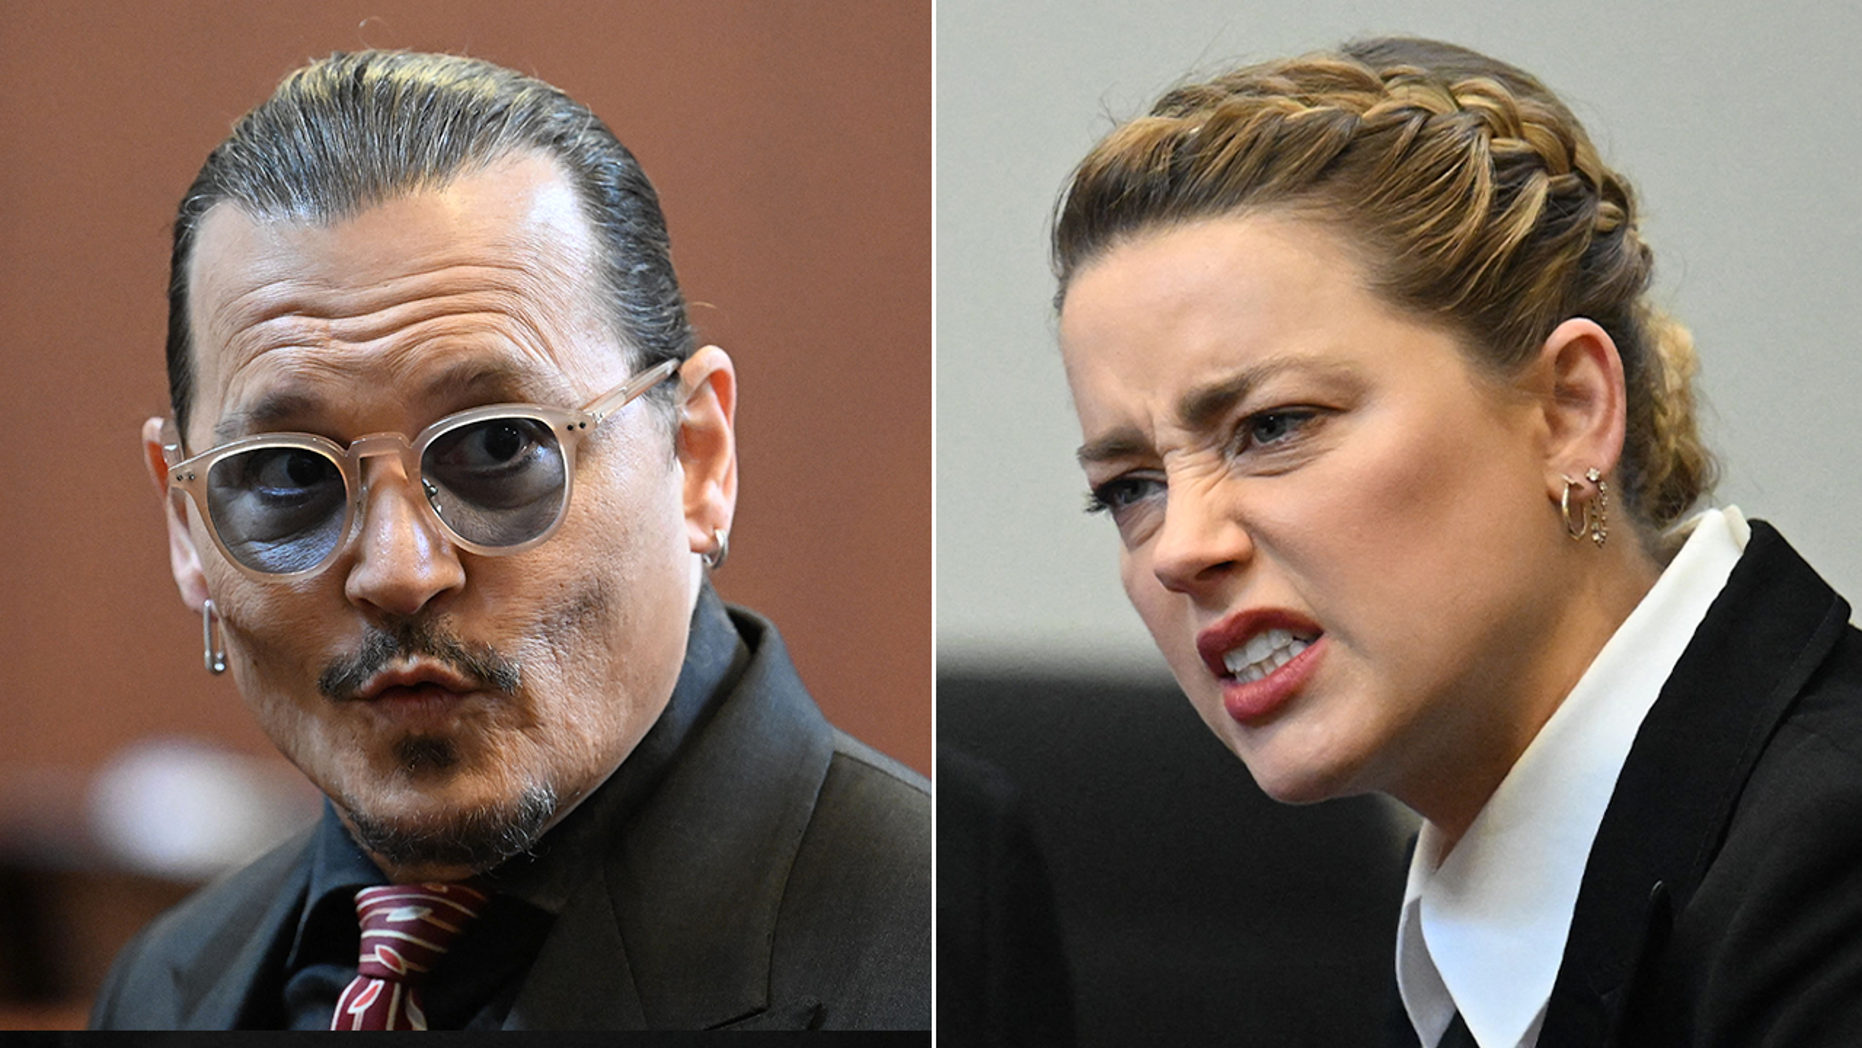 ‘SNL’ goes full bathroom humor with Depp-Heard trial feces in the bed allegation